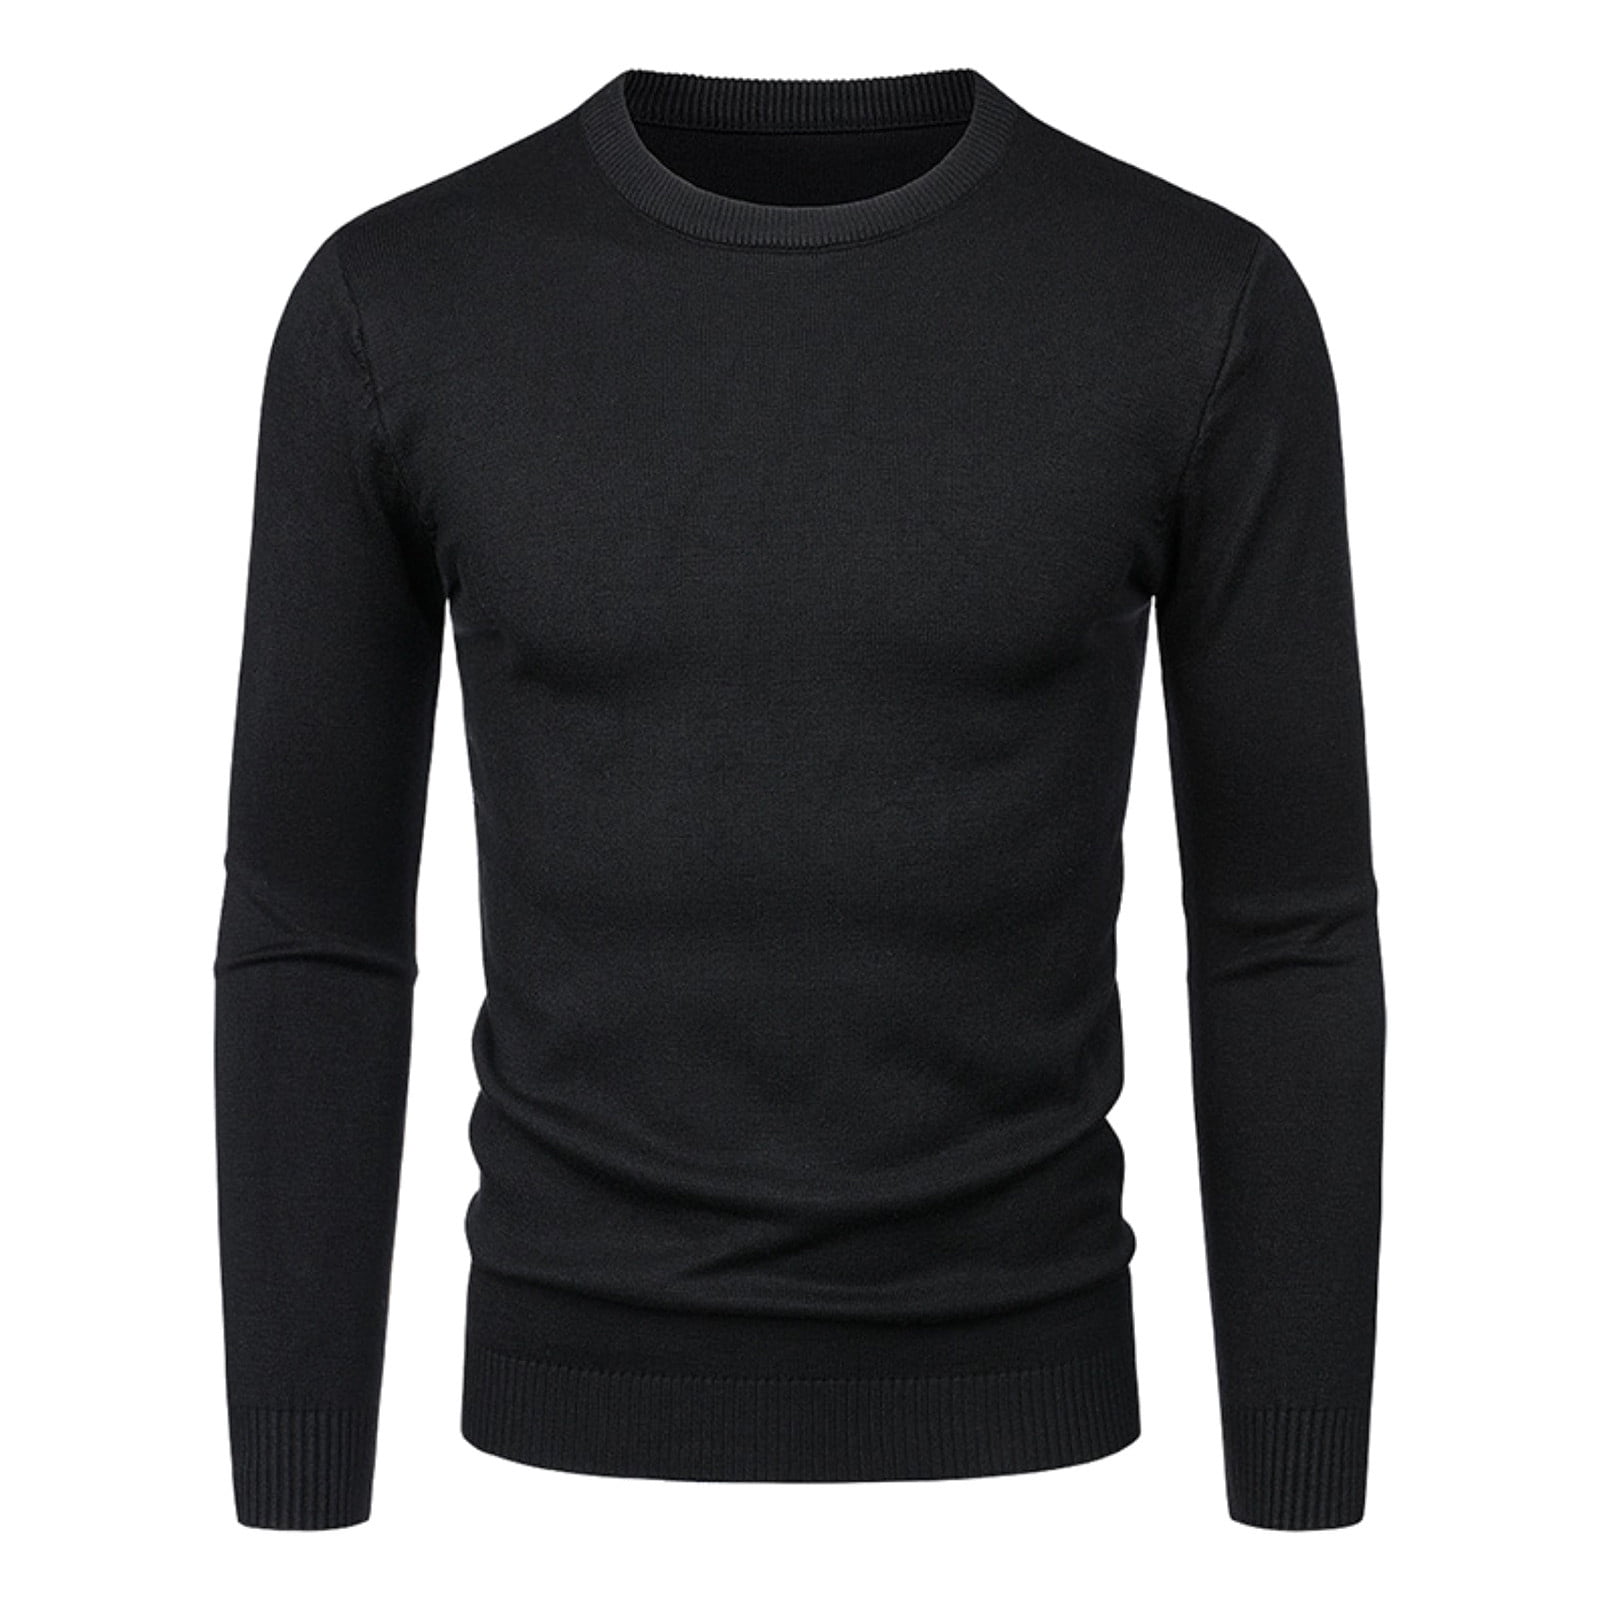 TOWED22 Winter Sweater for Men Male Autumn Winter Slim Knits Sweater ...